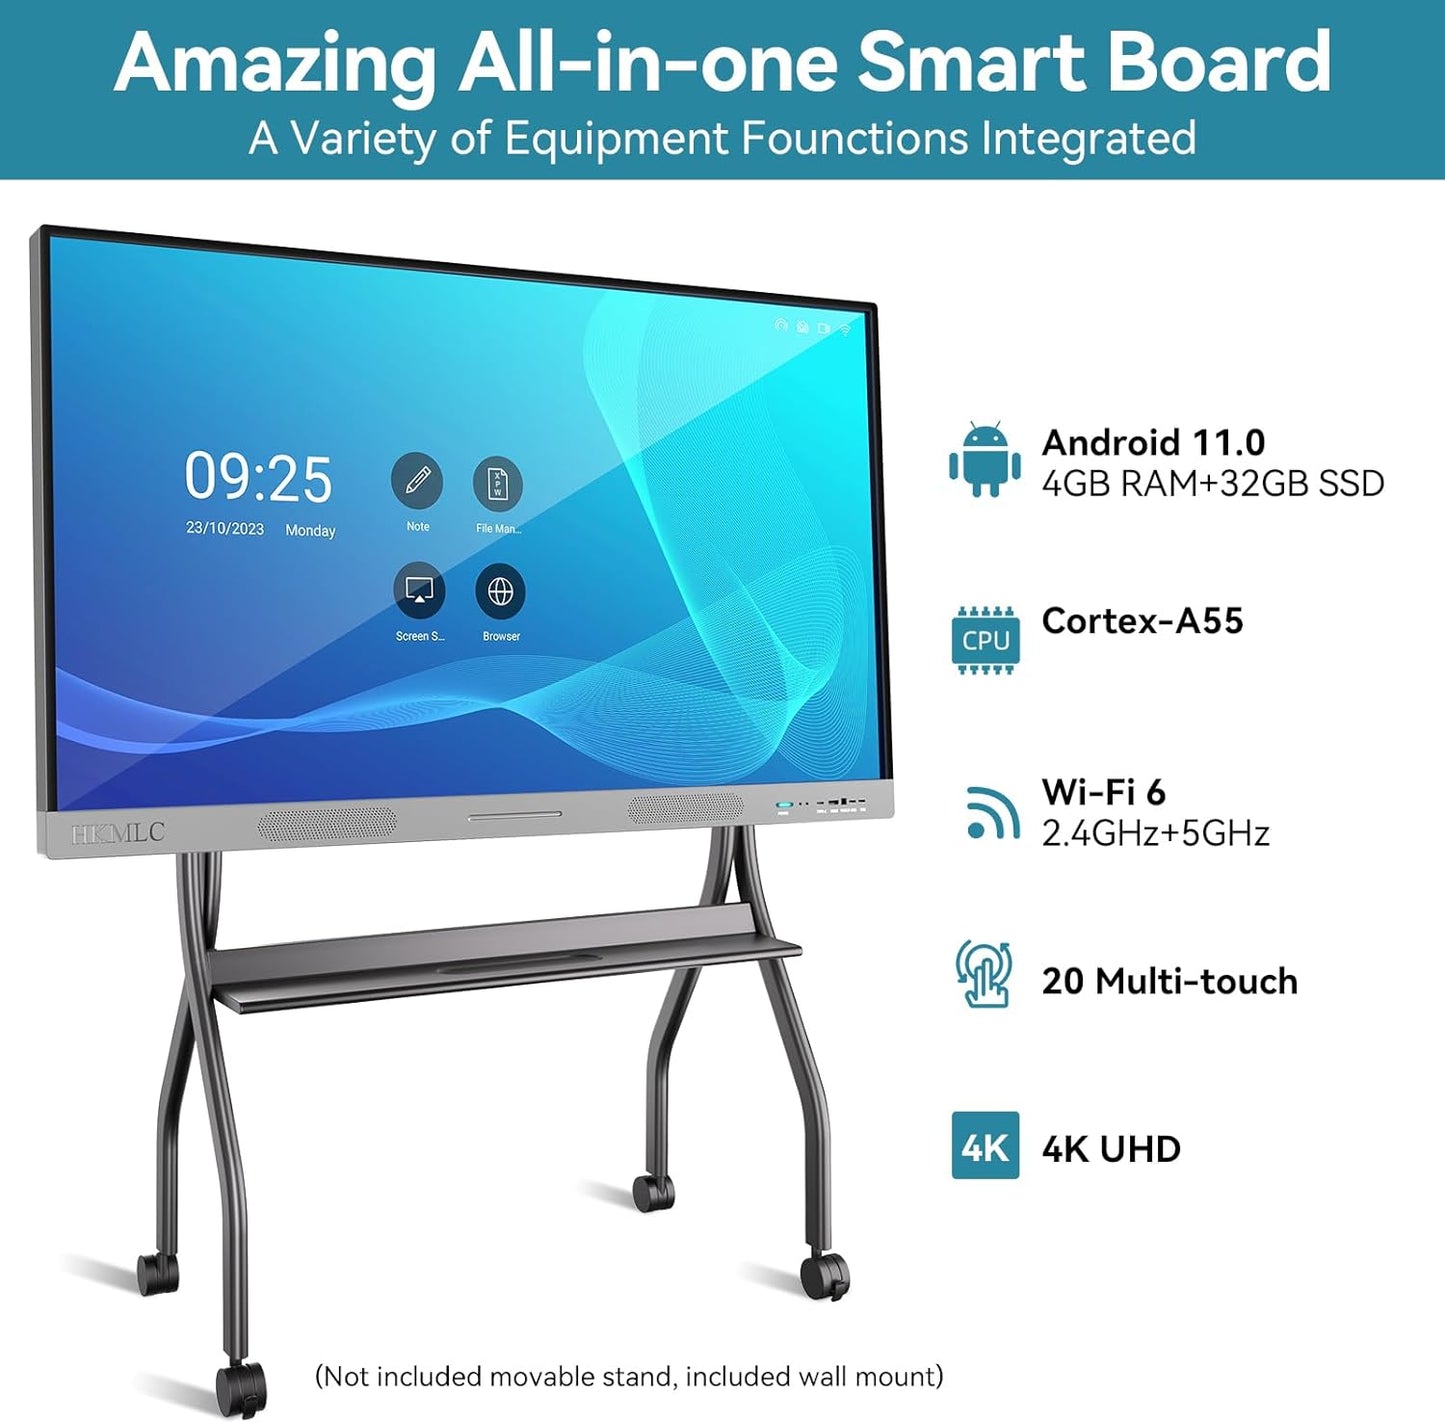 HKMLC Smart Board, 55 Inch All-in-One Interactive Whiteboard with 4K UHD Touch Screen Flat Panel, Digital Electronic Whiteboard for Classroom and Business(Whiteboard+Stand)